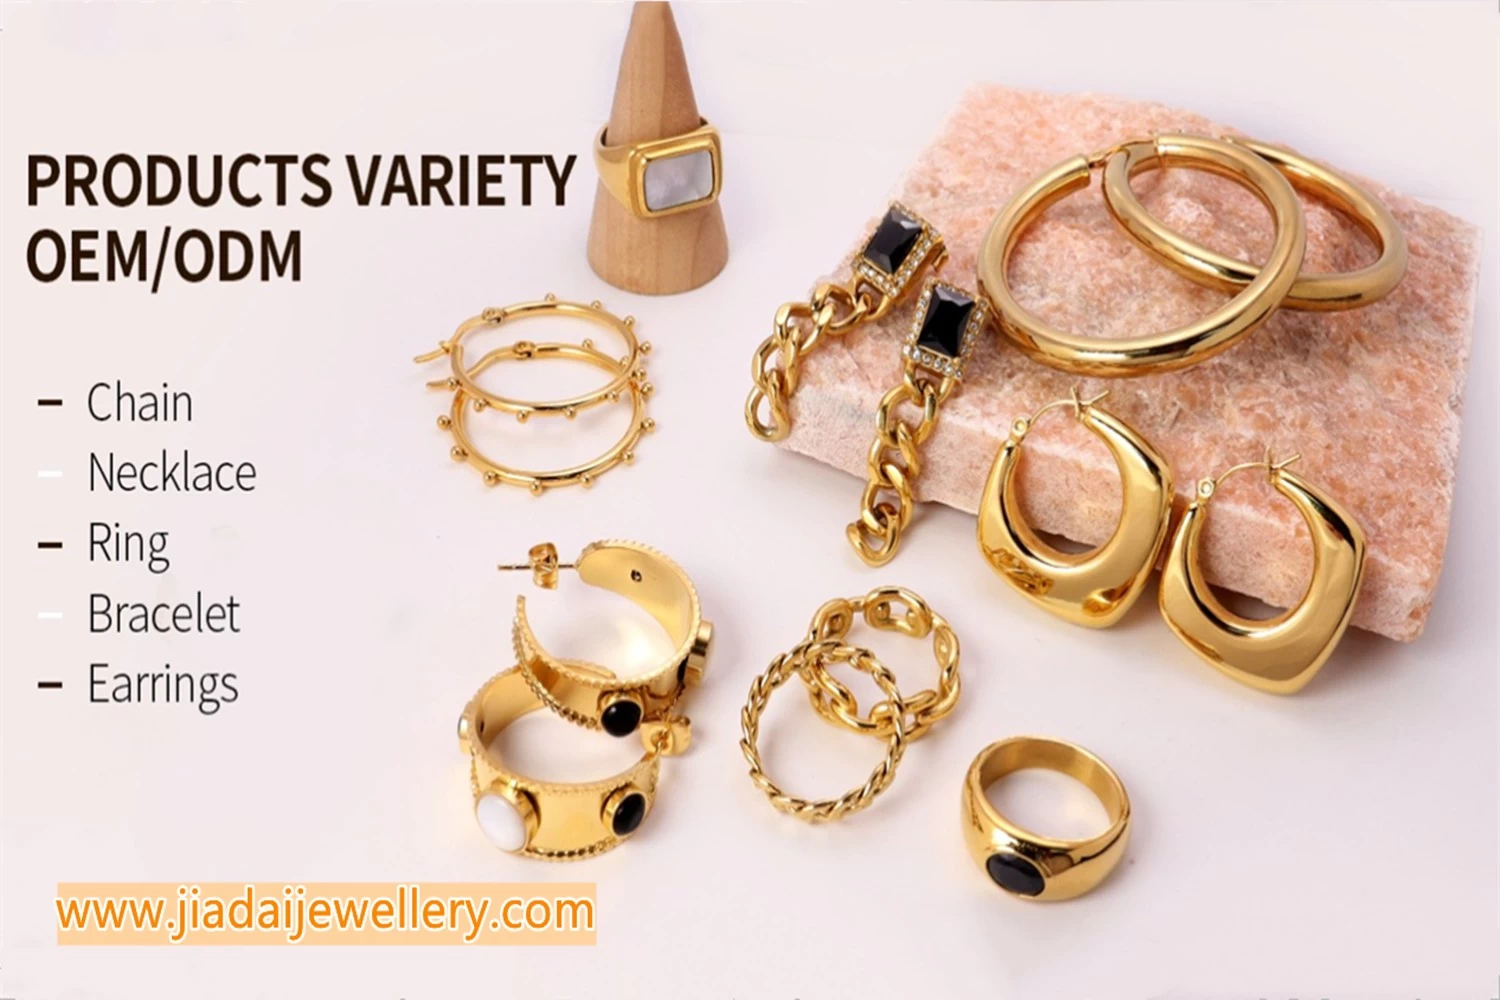 How to Look for Honest Jewelry Suppliers?